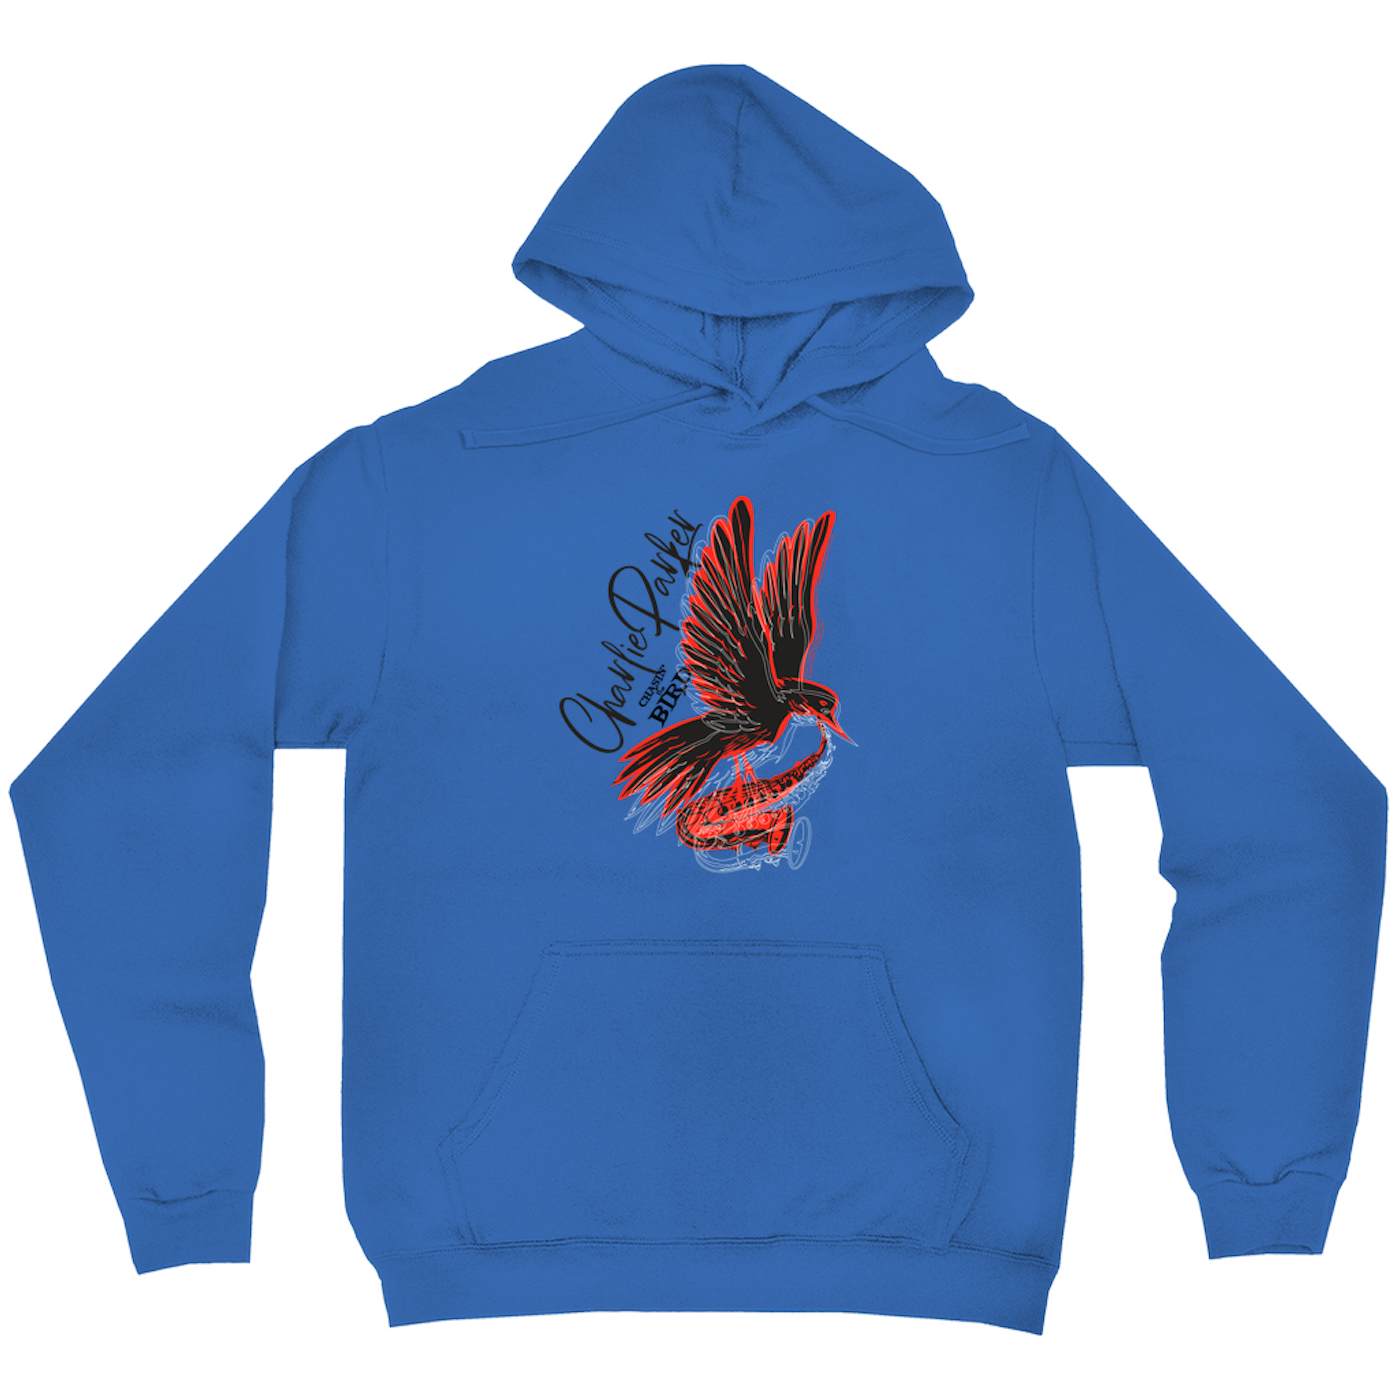 Charlie Parker Hoodie | Chasin' The Bird Black And Red Design